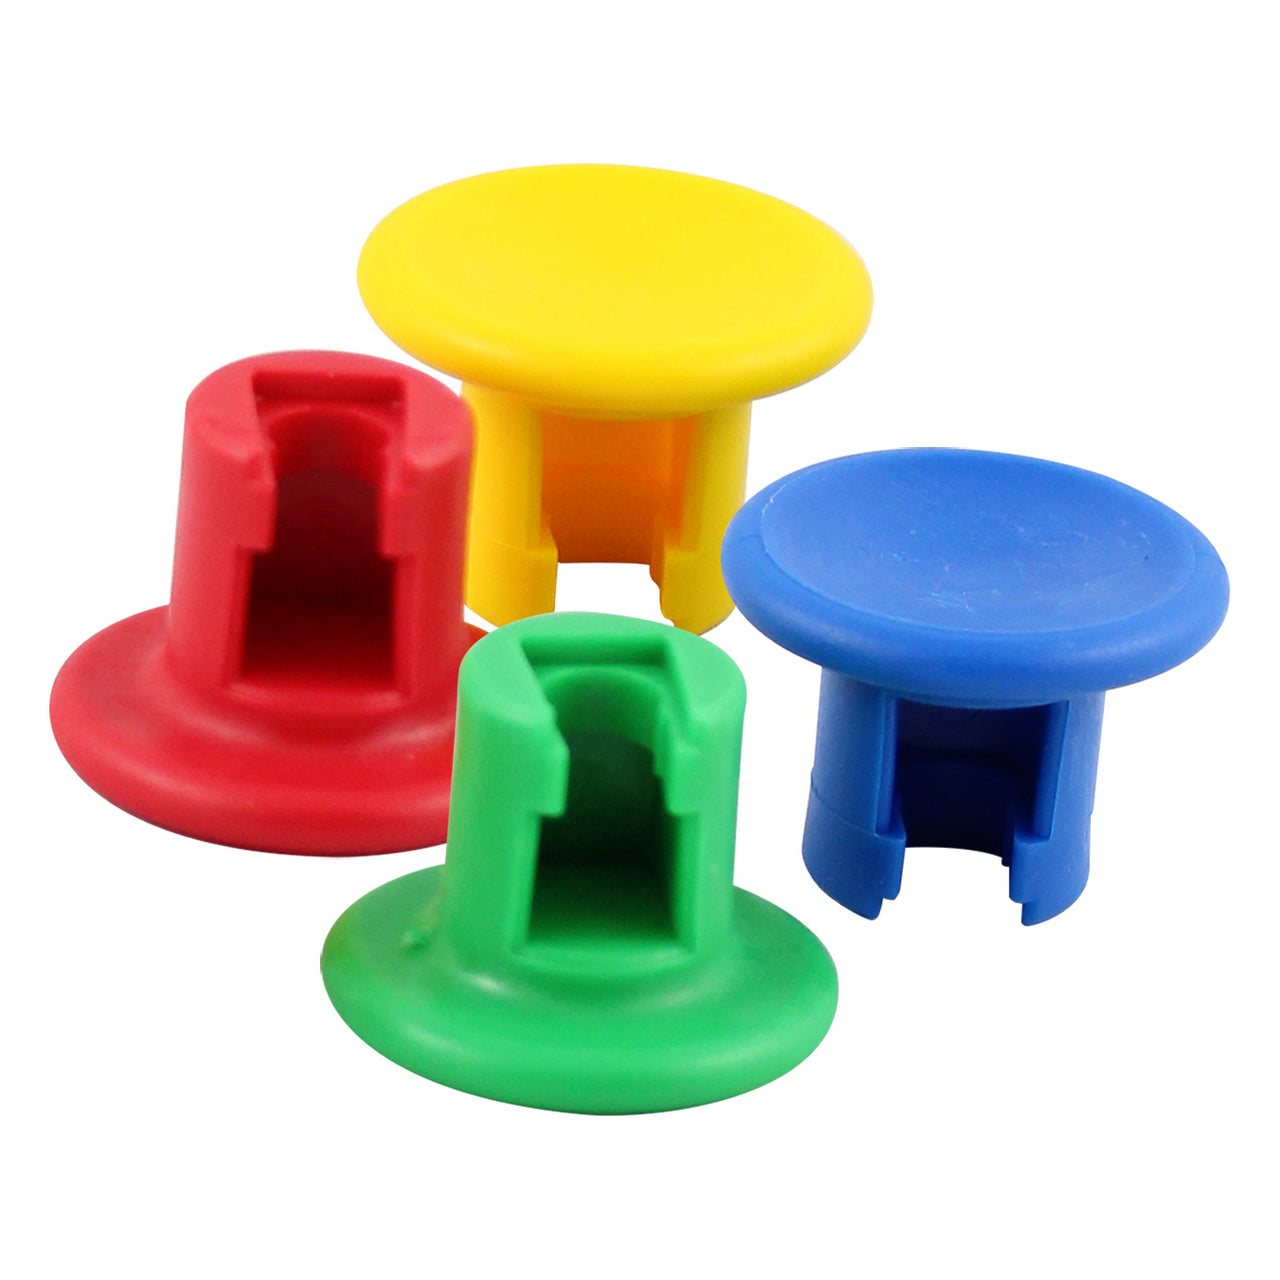 N.j. Phillips Coloured Knobs For Repeaters (4 Pack) - Drug Administration N.j. Phillips - Canada